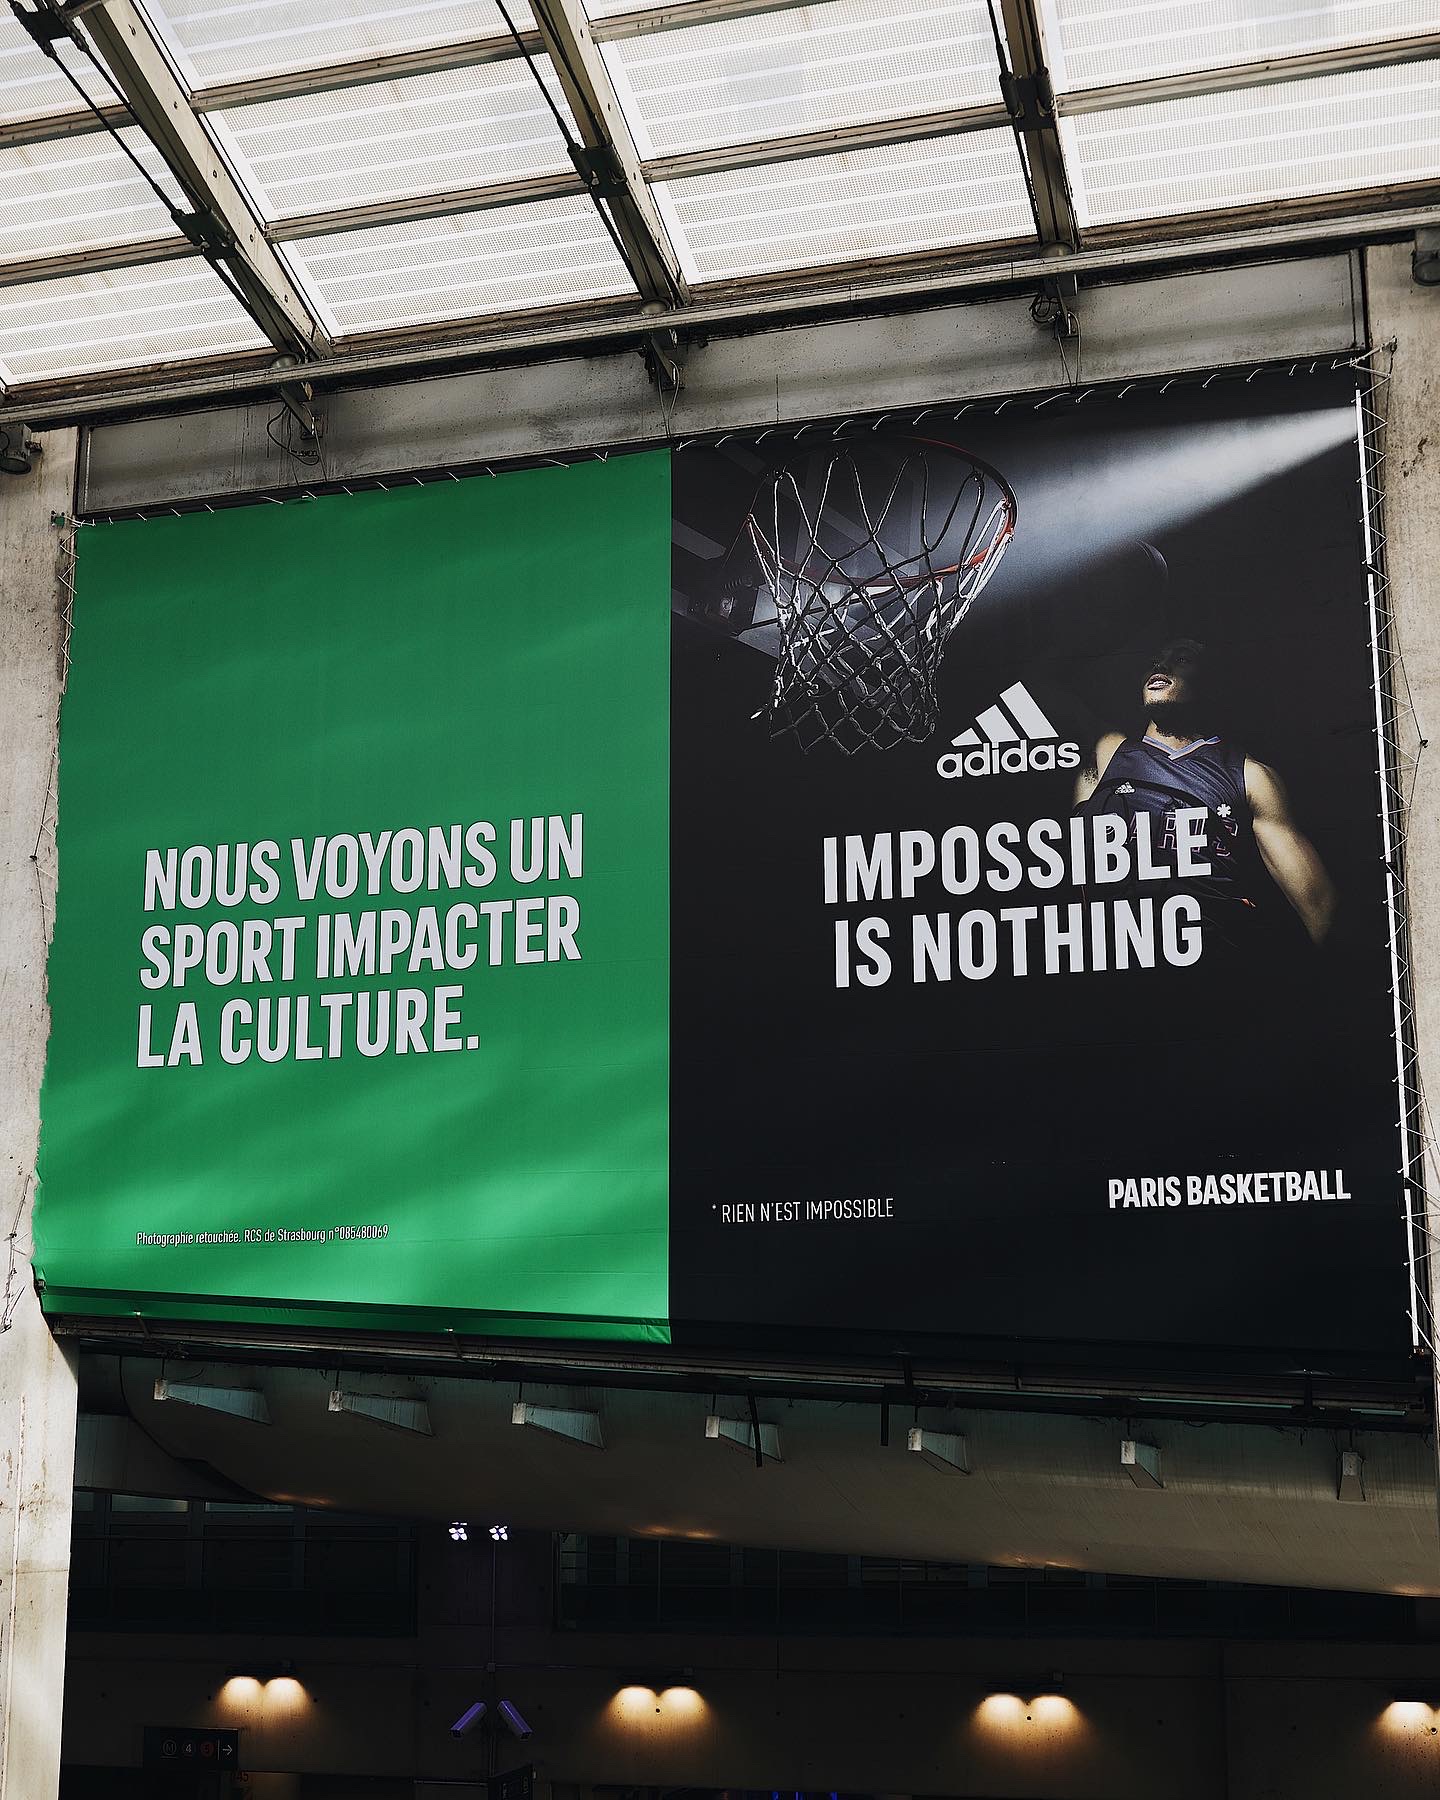 Adidas Impossible Nothing Campaign - Melo